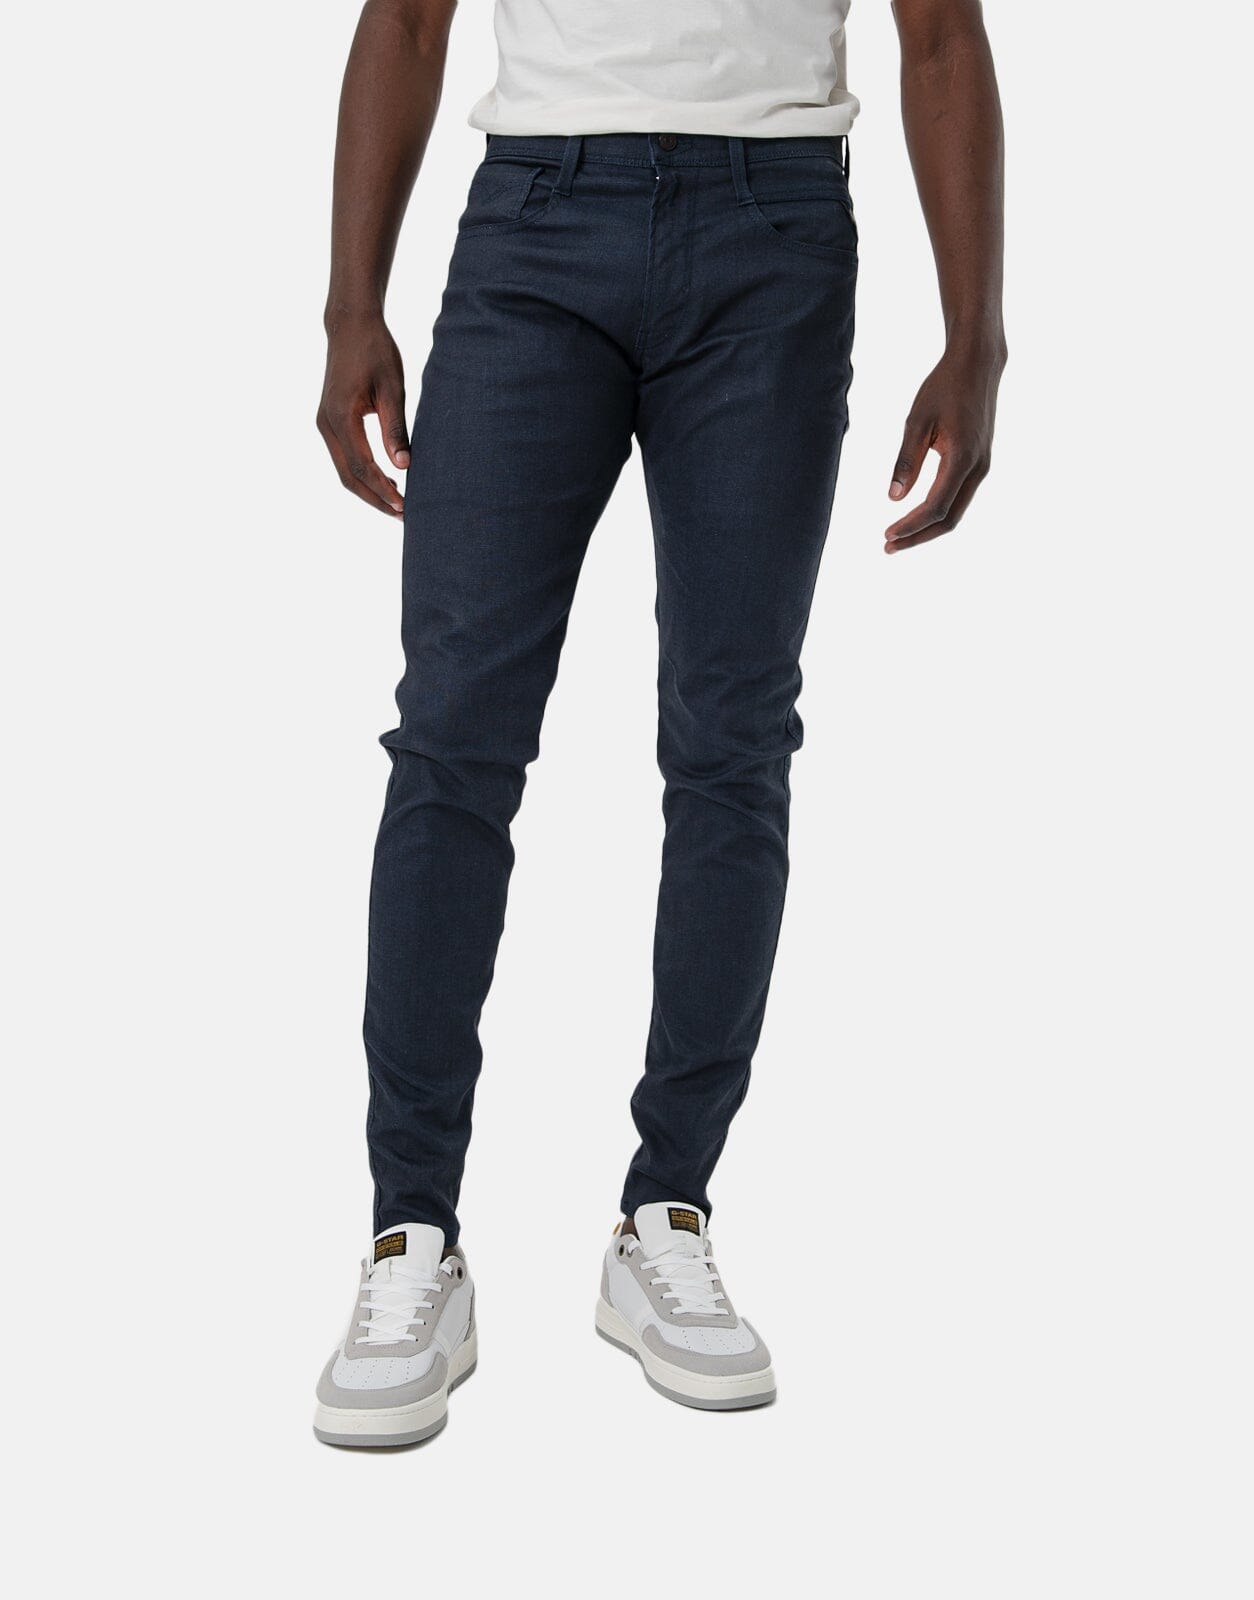 Replay Wax Coated Bronny Super Slim Fit Jeans | Subwear